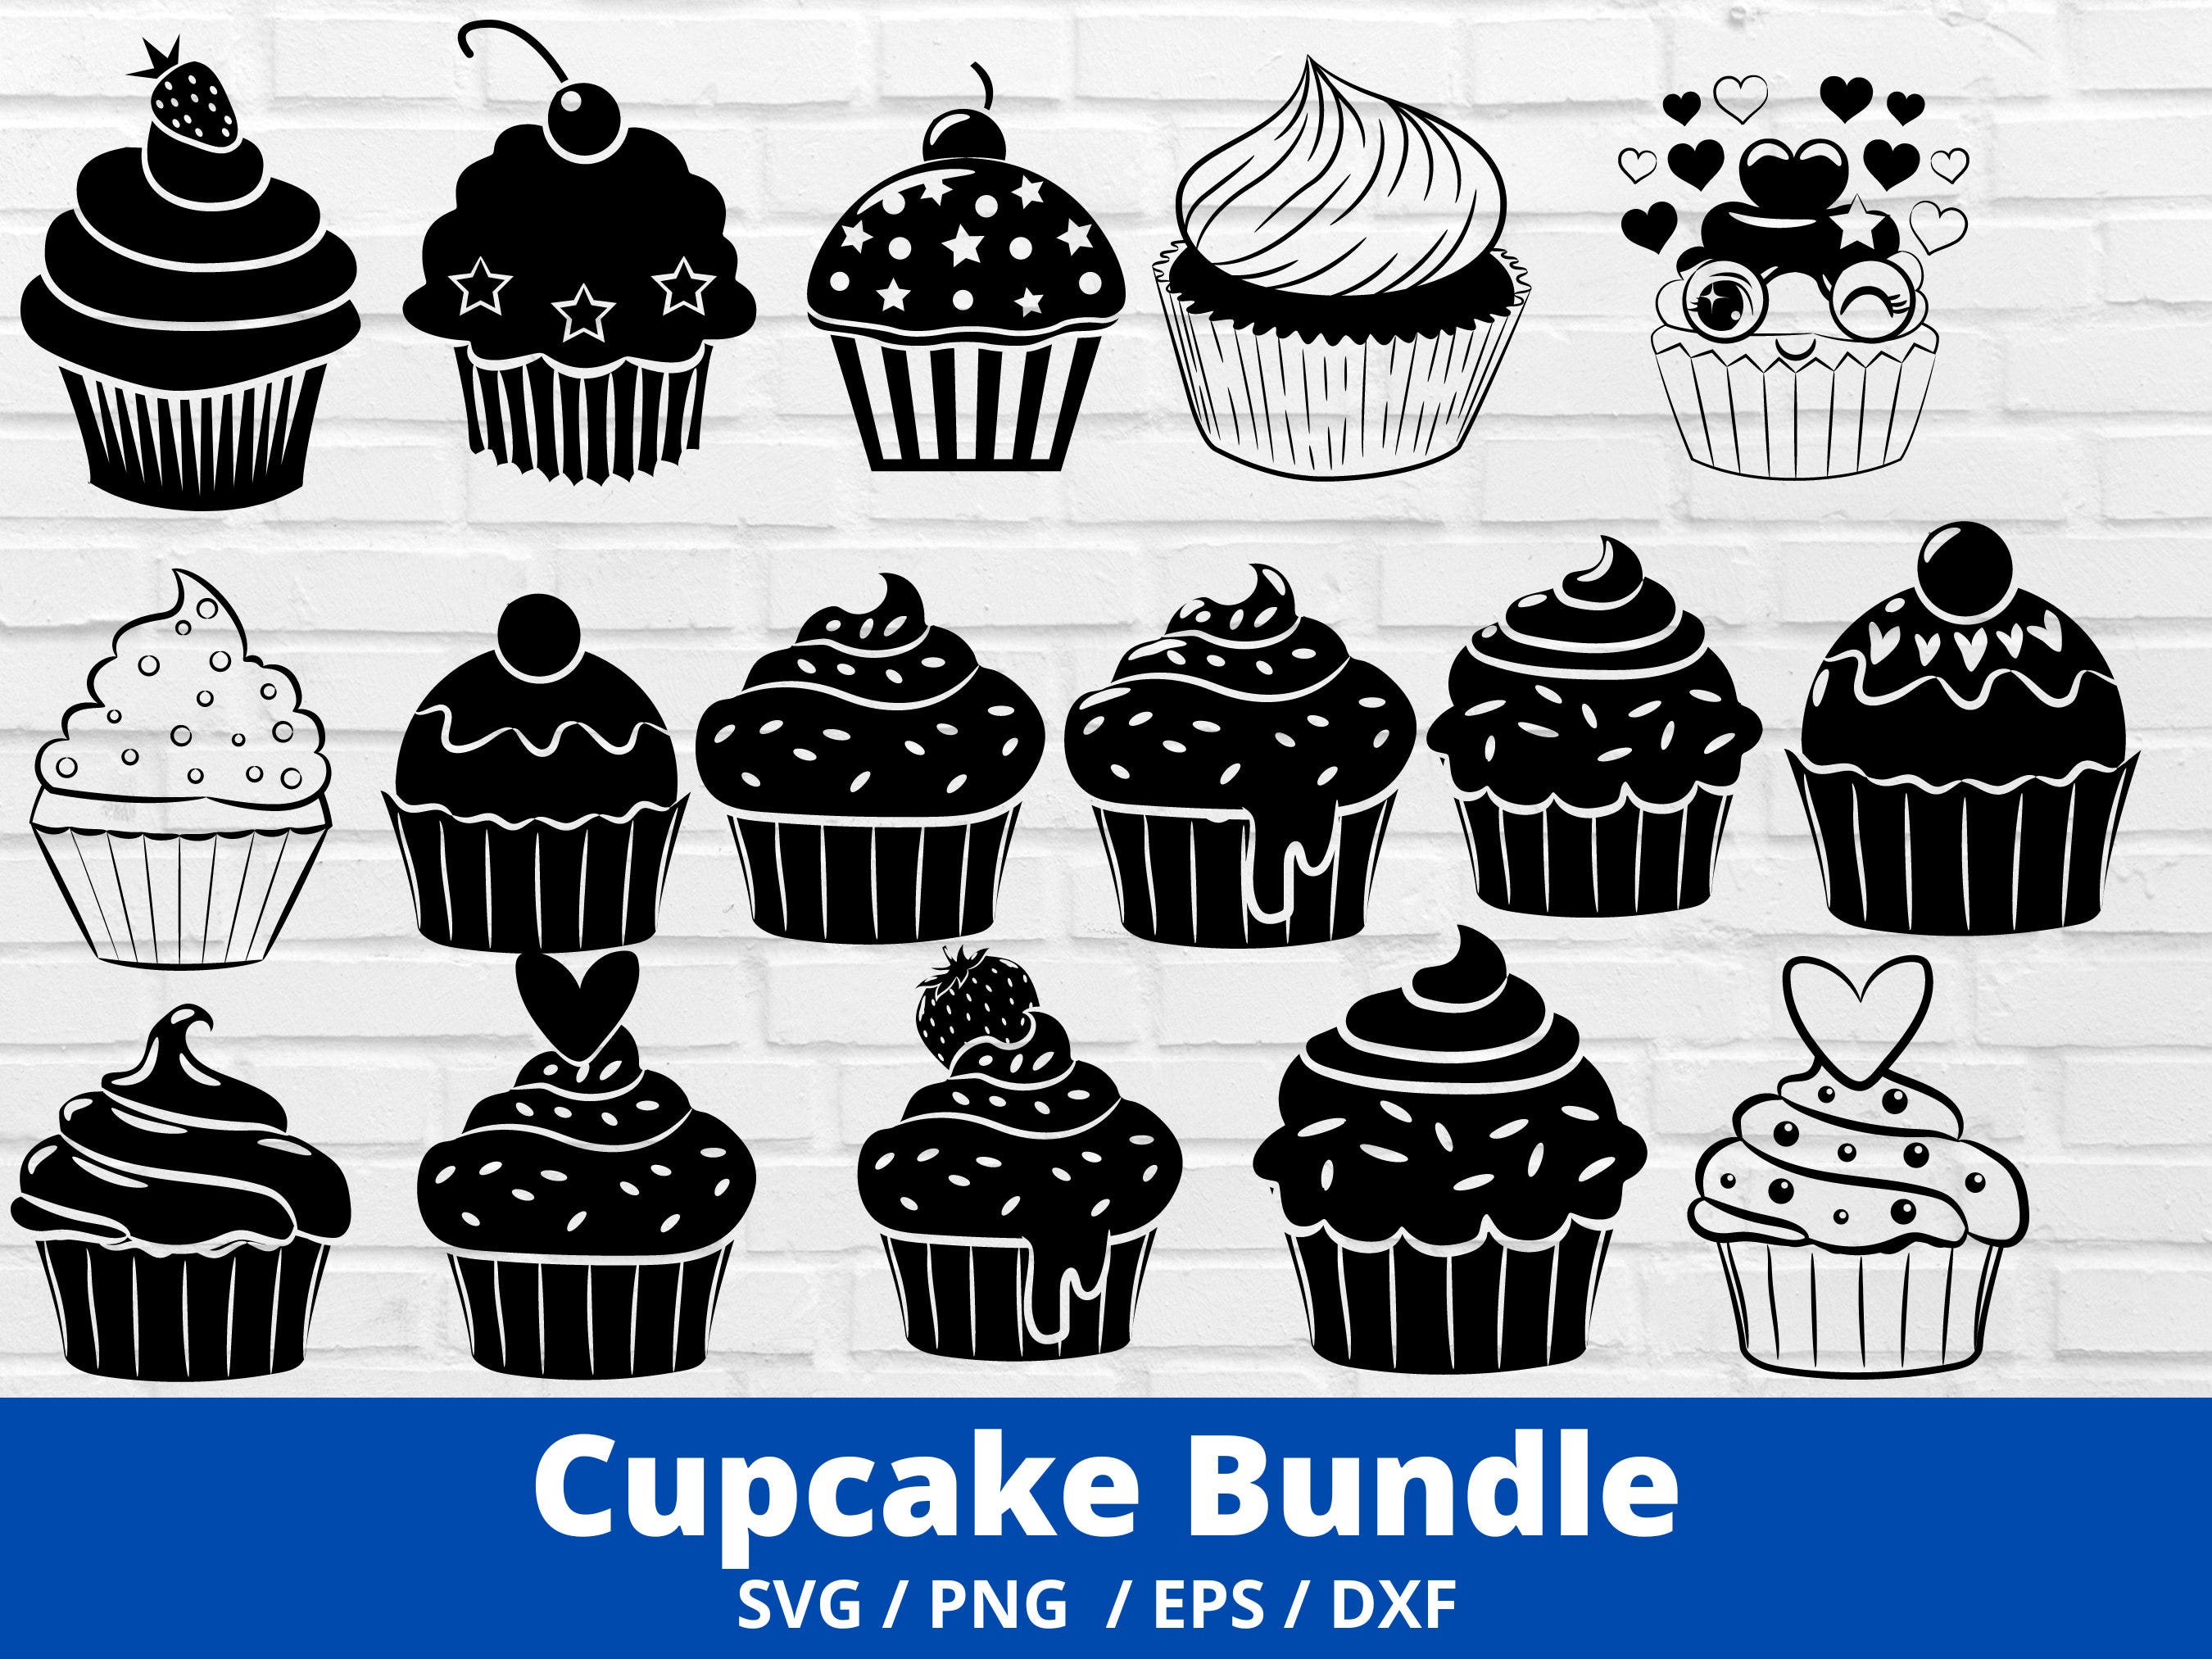 Muffin Svg Bundle,Cup Cake Svg Bundle,DXF,Muffin Cut File,Bakery,Birthday,Dessert,Sweets,Cricut,Silhouette,Commercial use